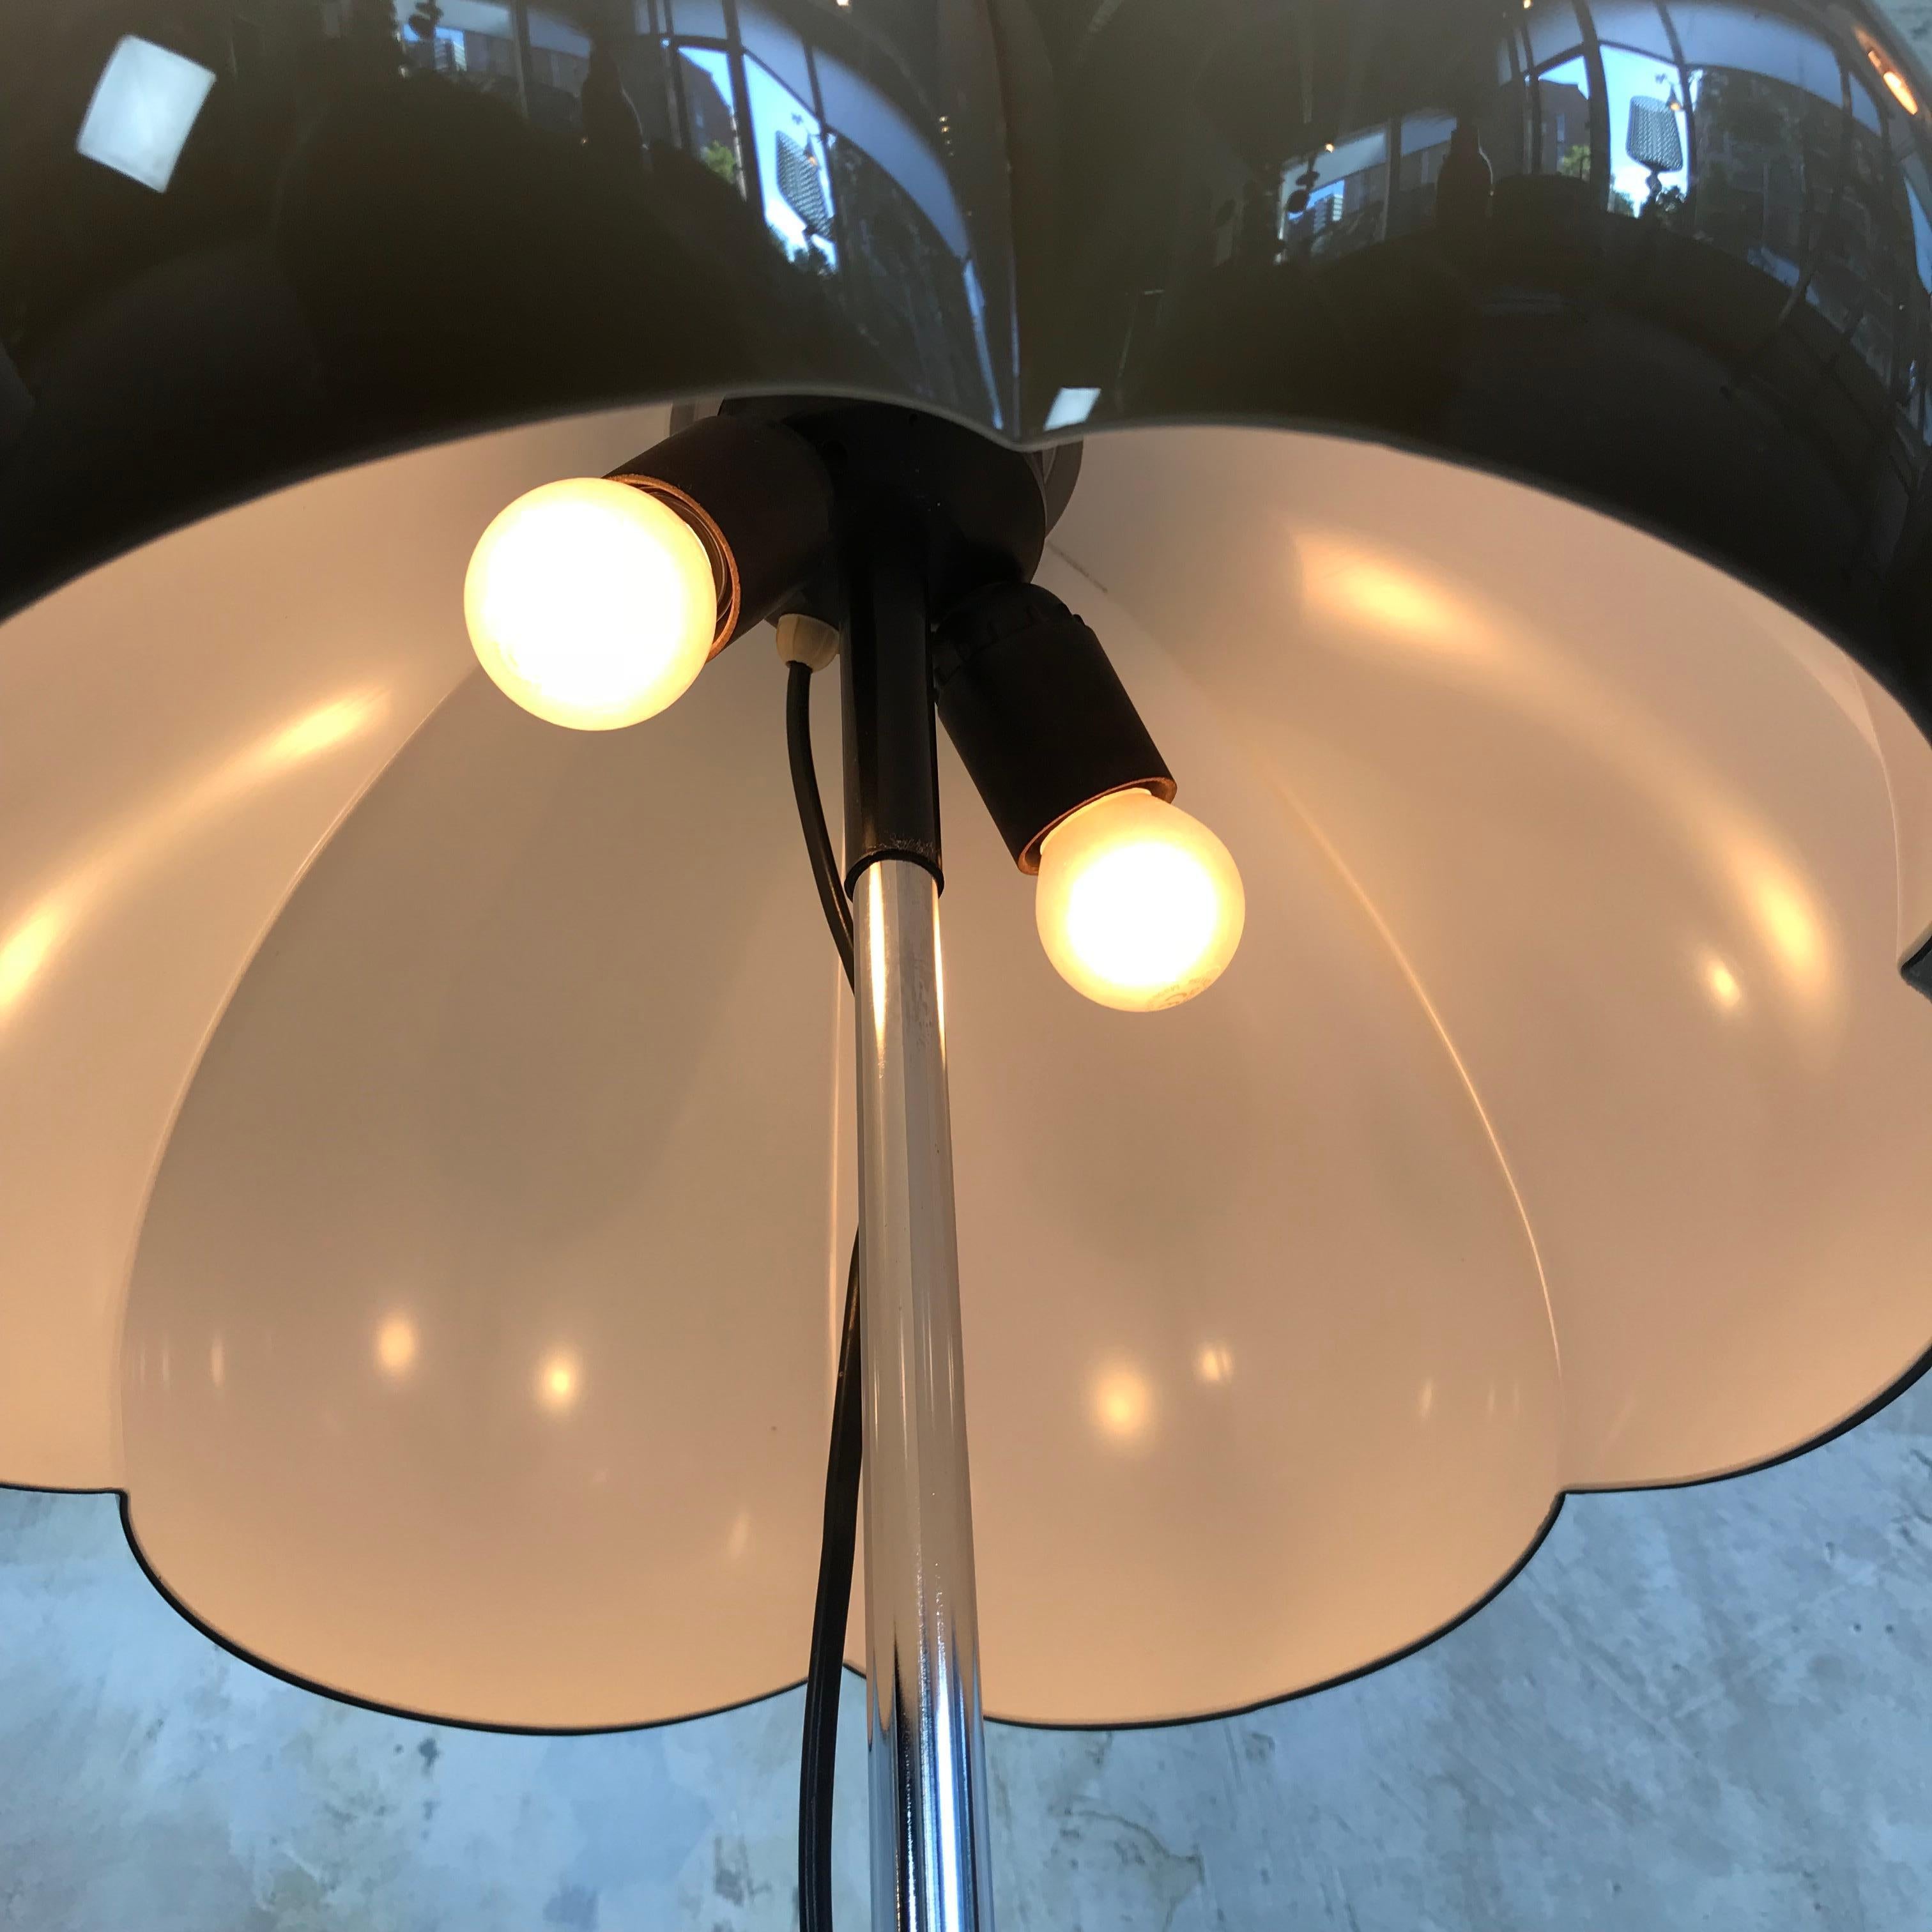 Mid-20th Century Midcentury Space Age Mushroom Table Lamp by Dijkstra, Dutch Design, 1960s